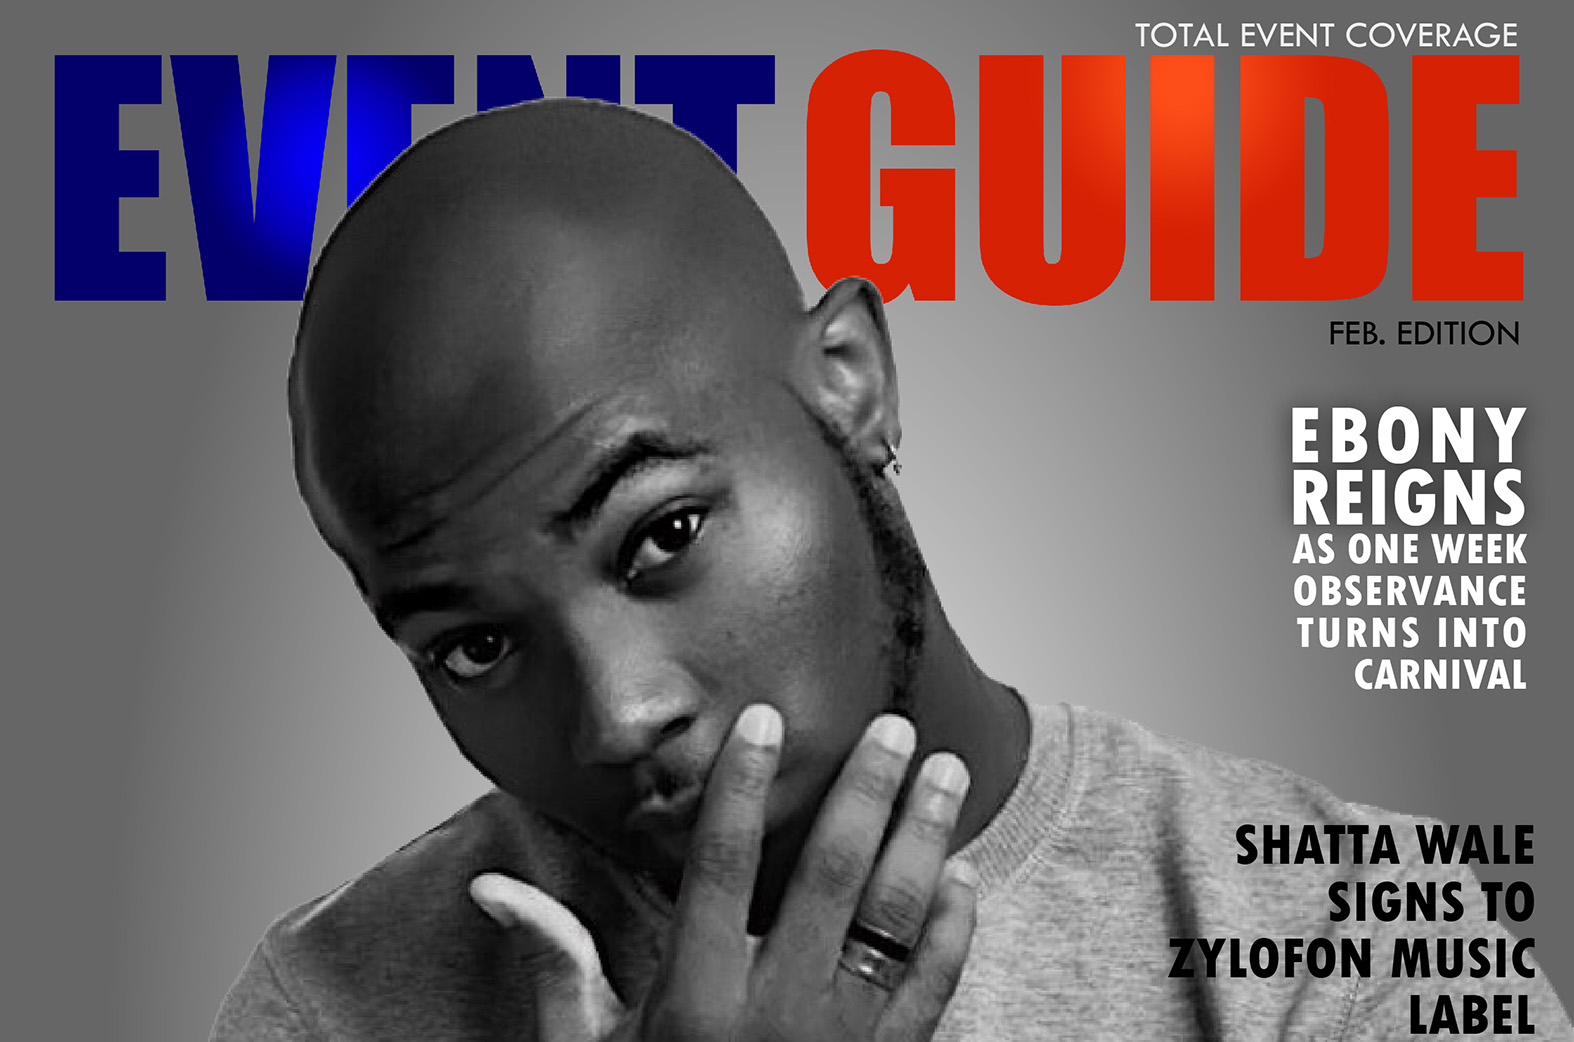 King Promise covers EVENTGUIDE February Edition